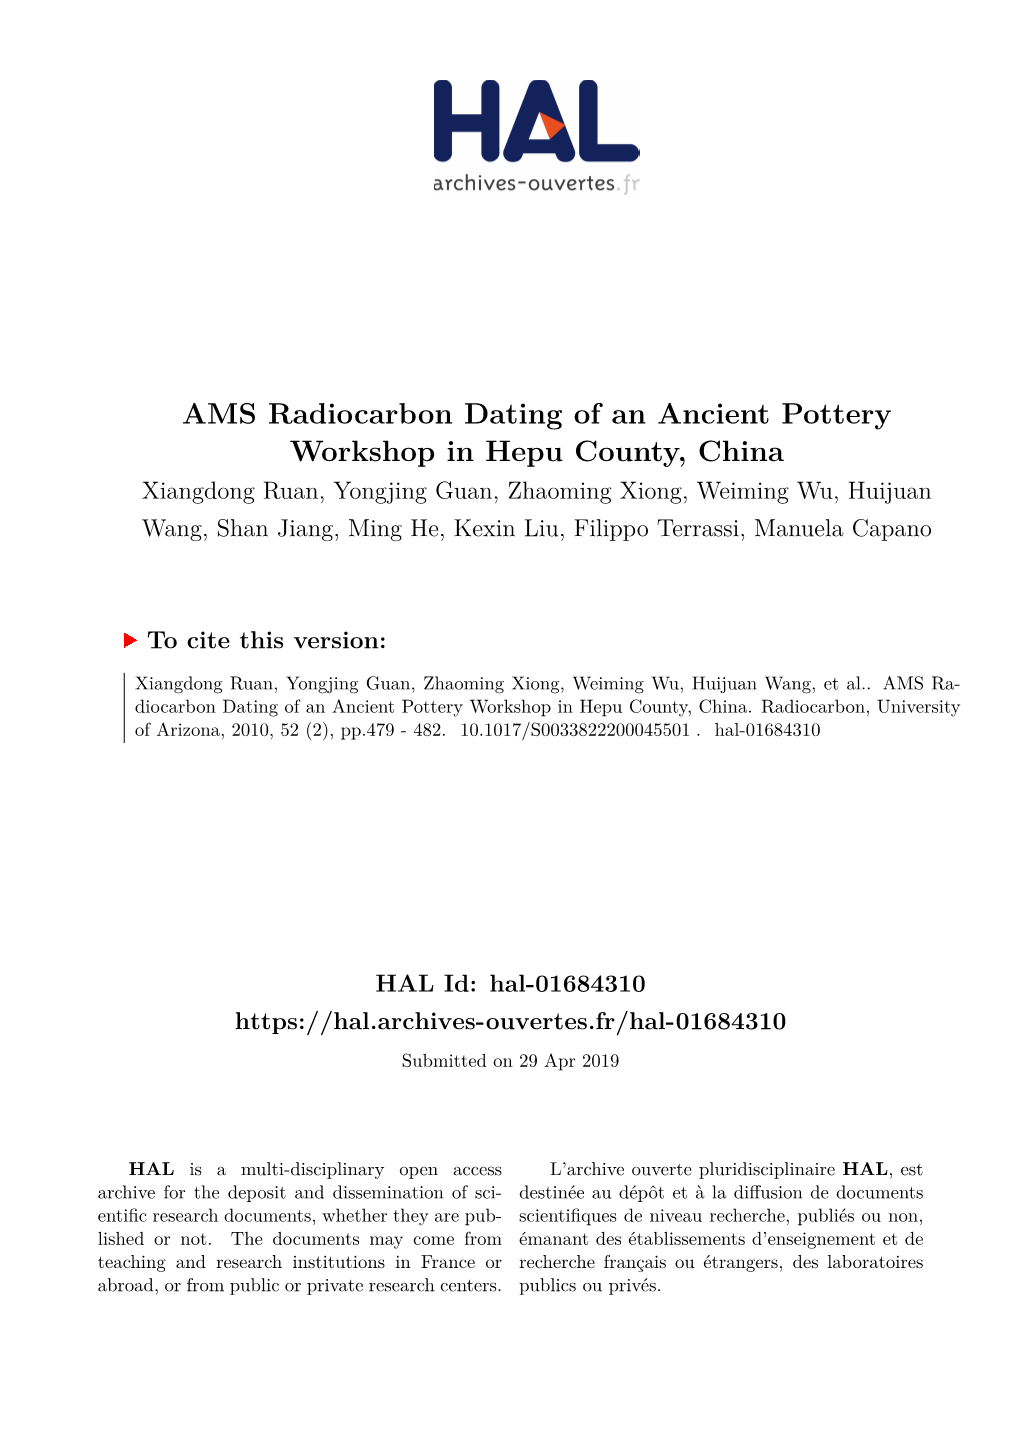 AMS Radiocarbon Dating of an Ancient Pottery Workshop in Hepu